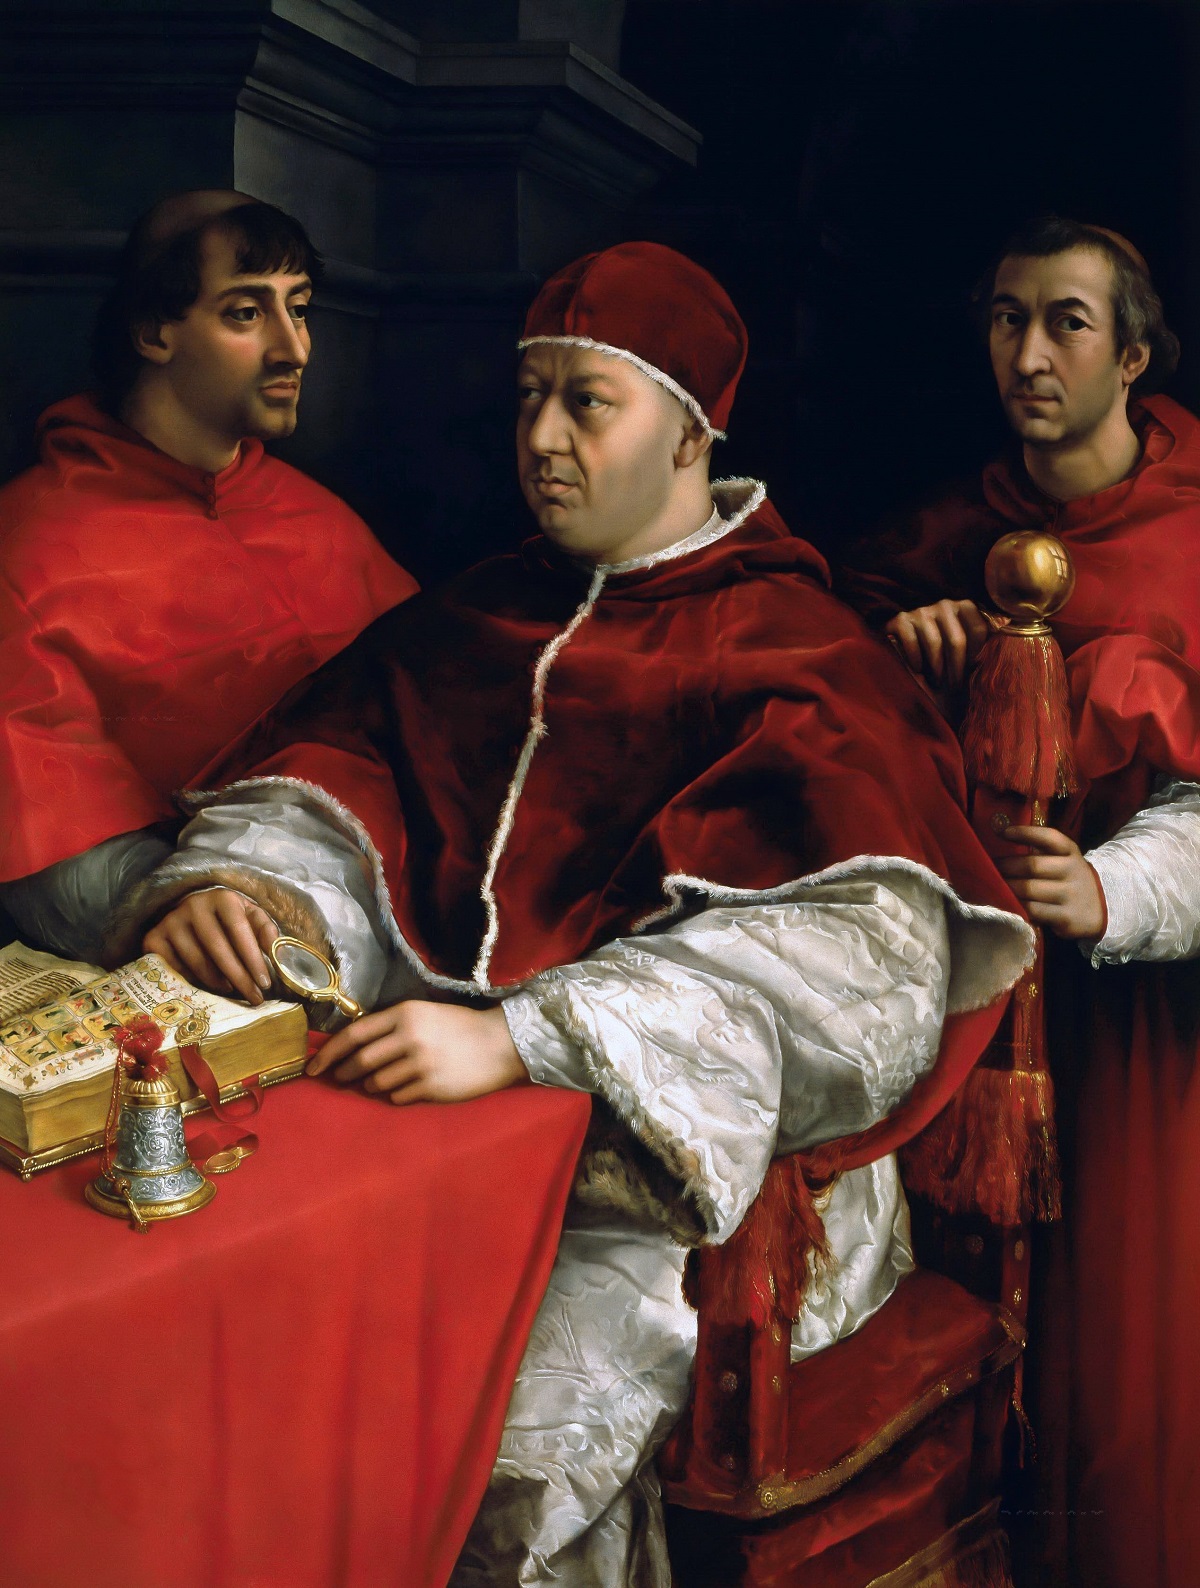 A Catholic pope and two cardinals in red robes gather around a table with a book and a red tablecloth